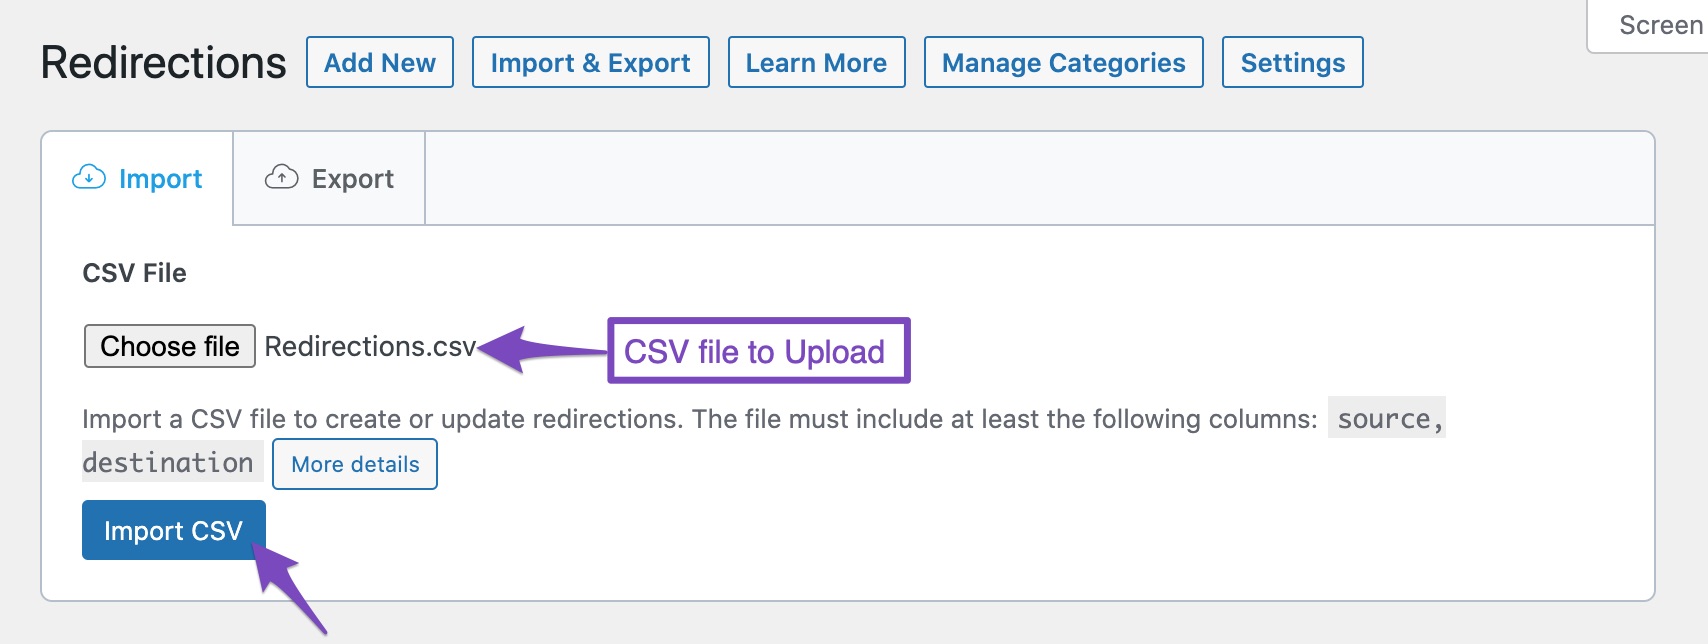 Importing CSV to create Redirections